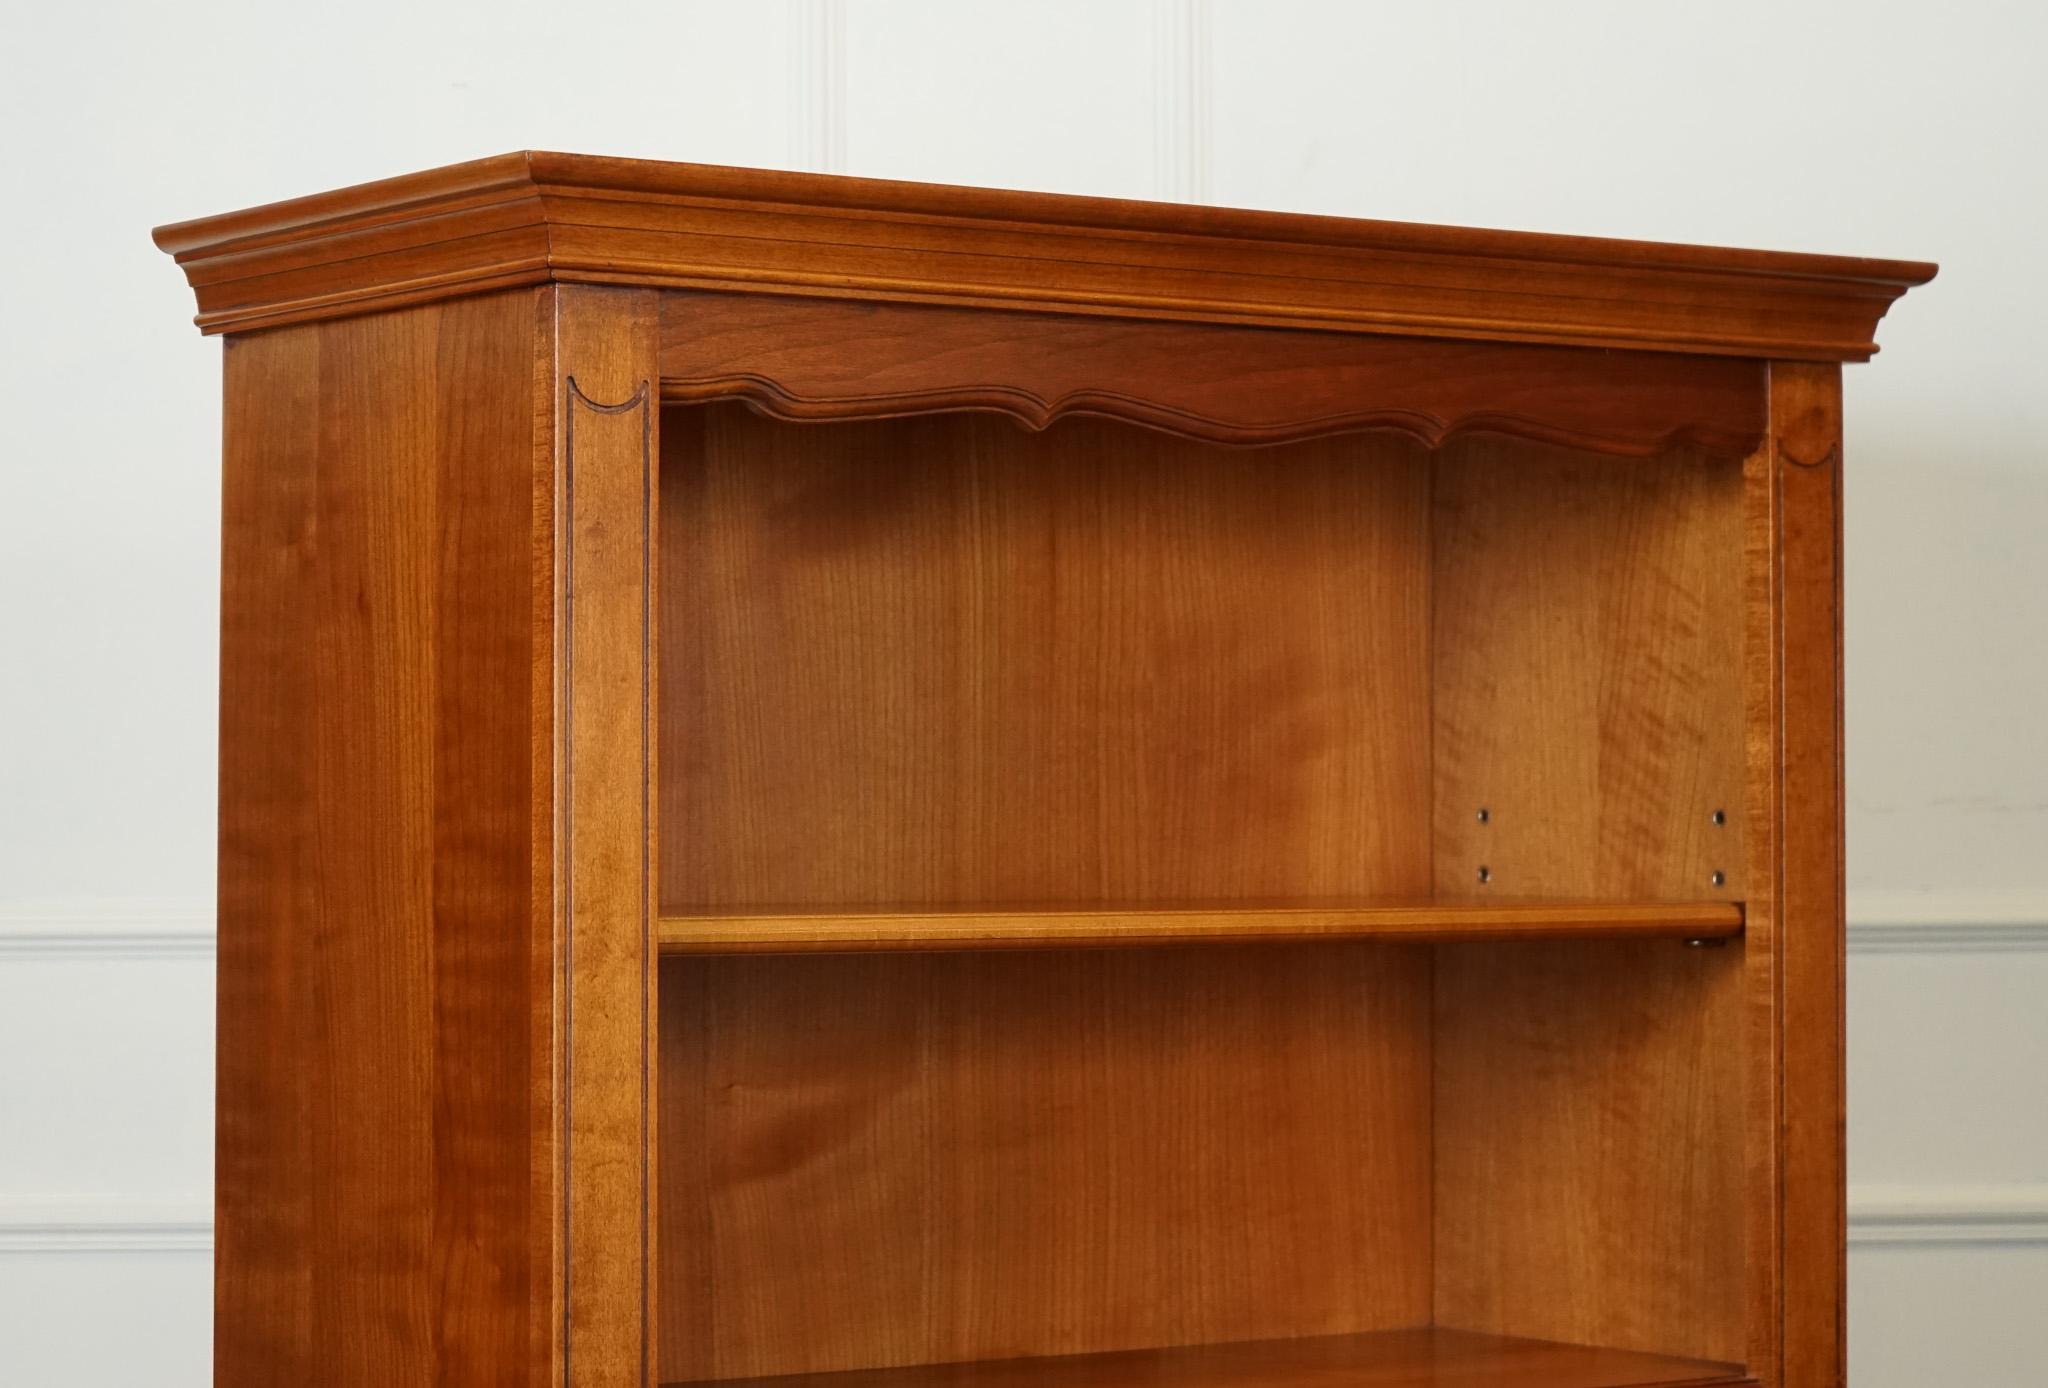 British VINTAGE TALL OPEN SOLID BOOKCASE 5 SHELVES MADE BY YOUNGER FURNITURE LONDON j1 For Sale